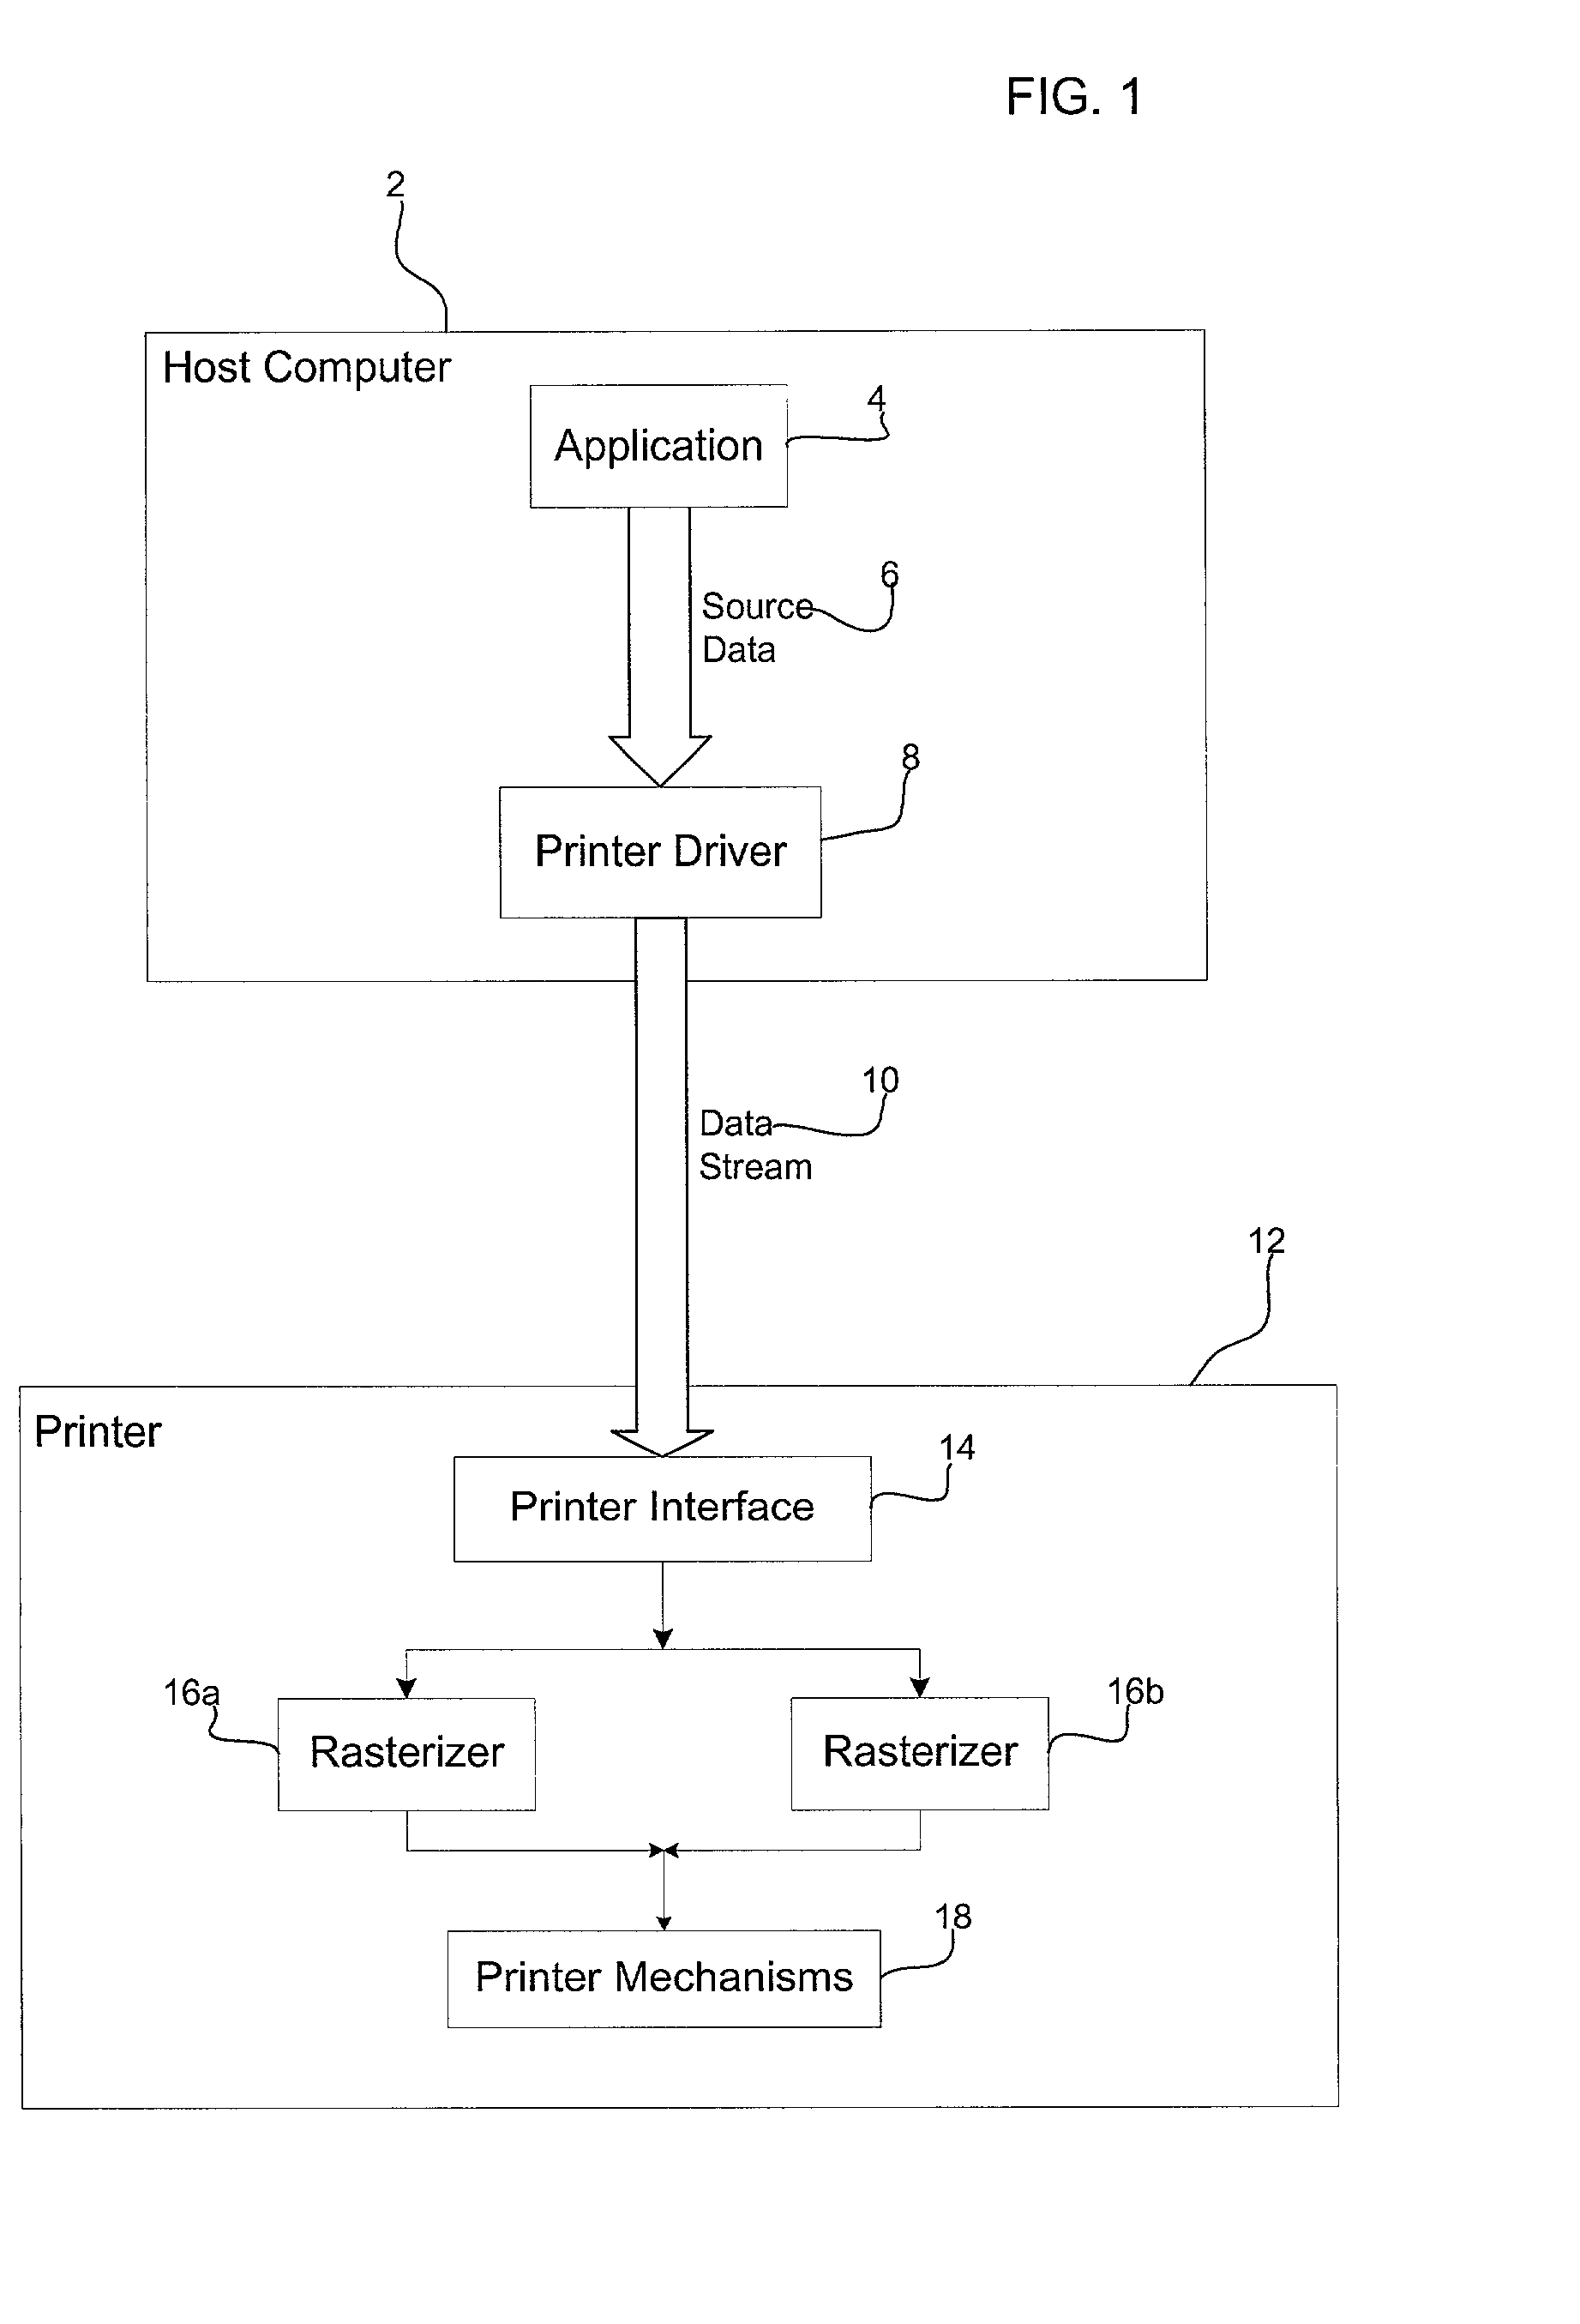 Method, system, and program for responding to an acknowledgment request from a printer driver